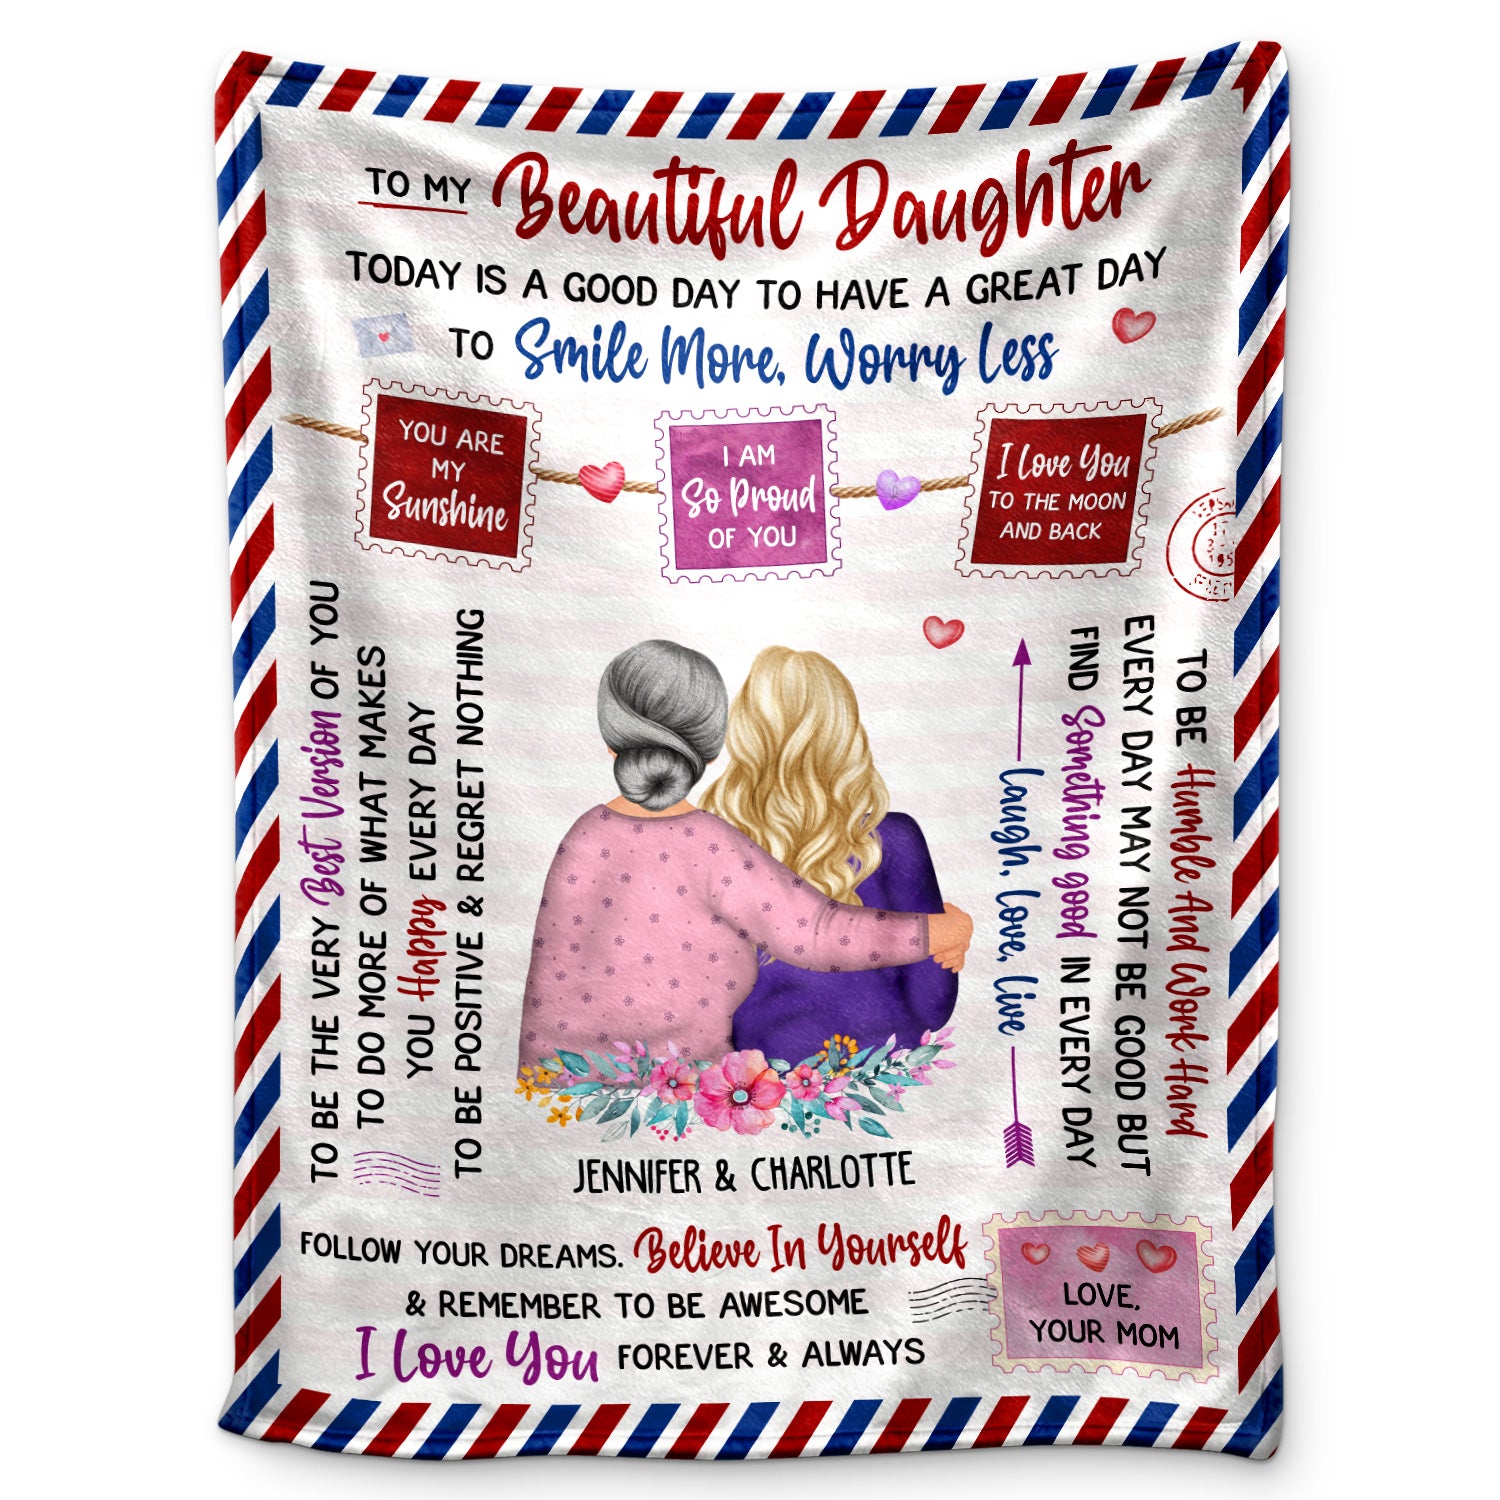 I Love You Forever And Always - Gift For Daughter - Personalized Fleece Blanket